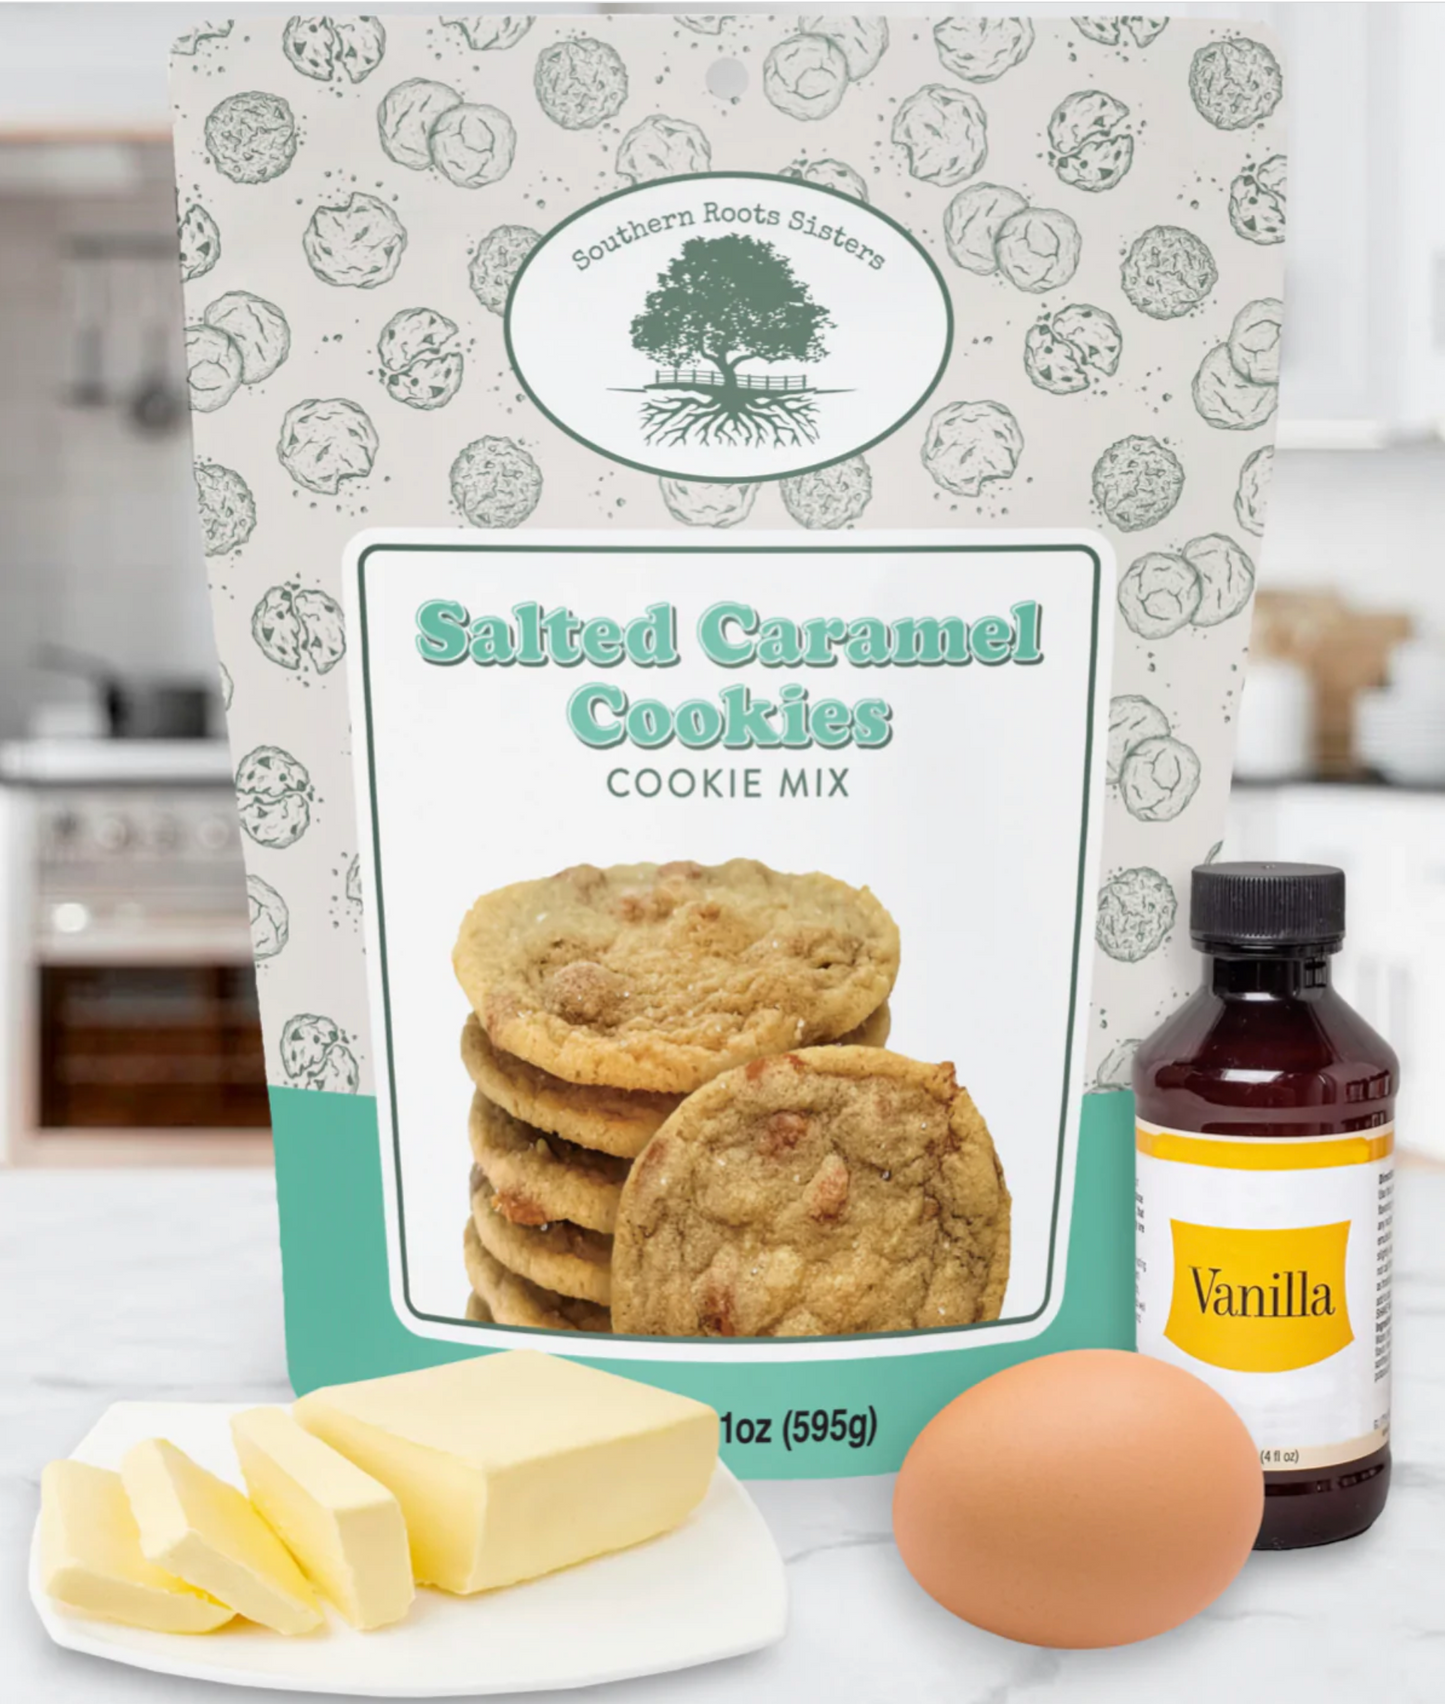 SOUTHERN ROOTS SISTERS SALTED CARAMEL COOKIE MIX